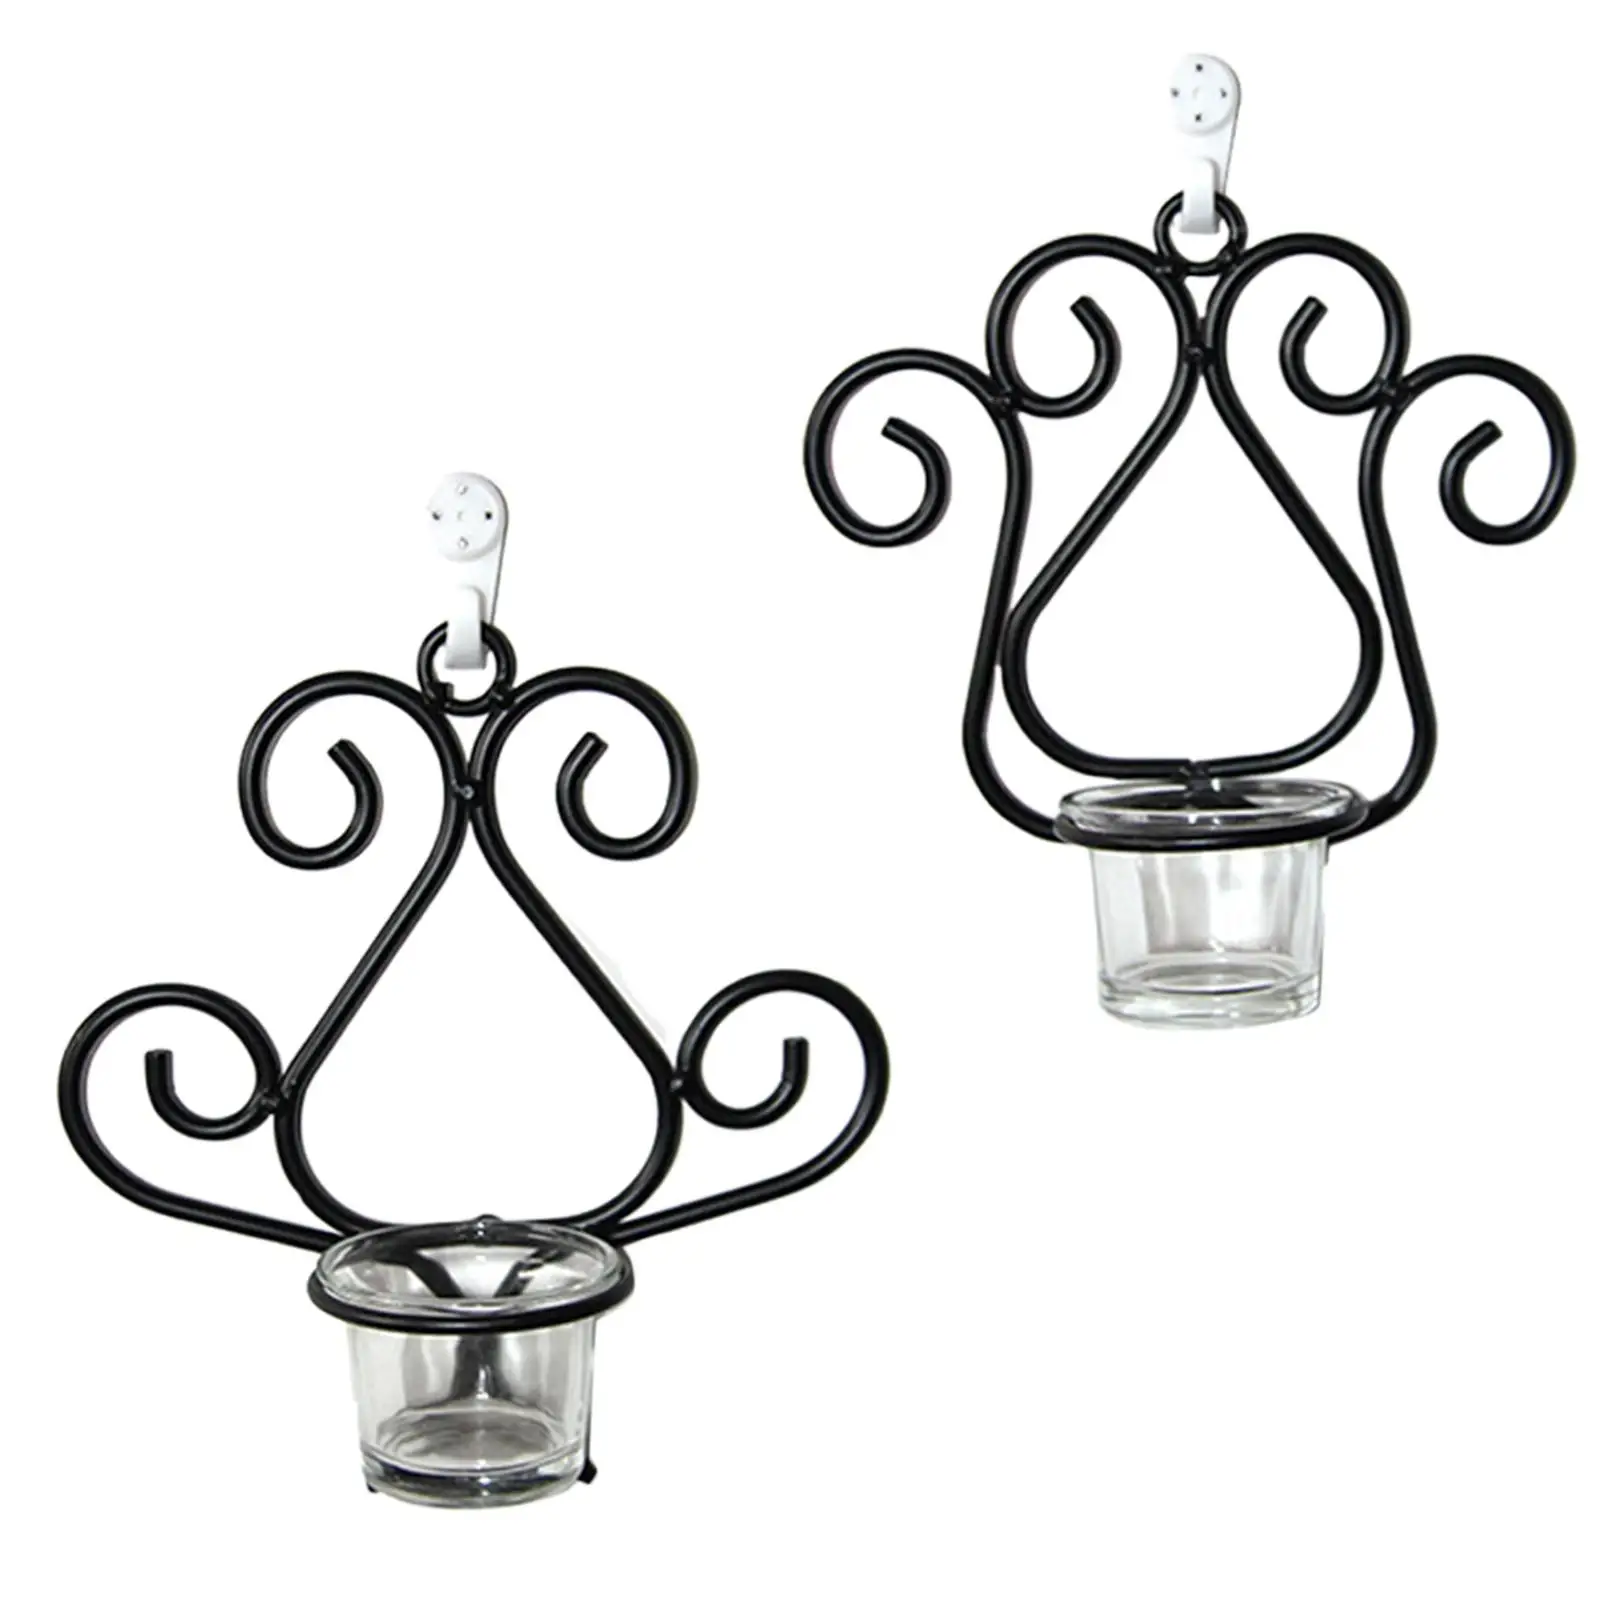 Retro Style Iron Wall Hanging Candle Stand Ornament Tea Light Holder Candelabra Candlestick Holder for Dinner Bedroom Wedding